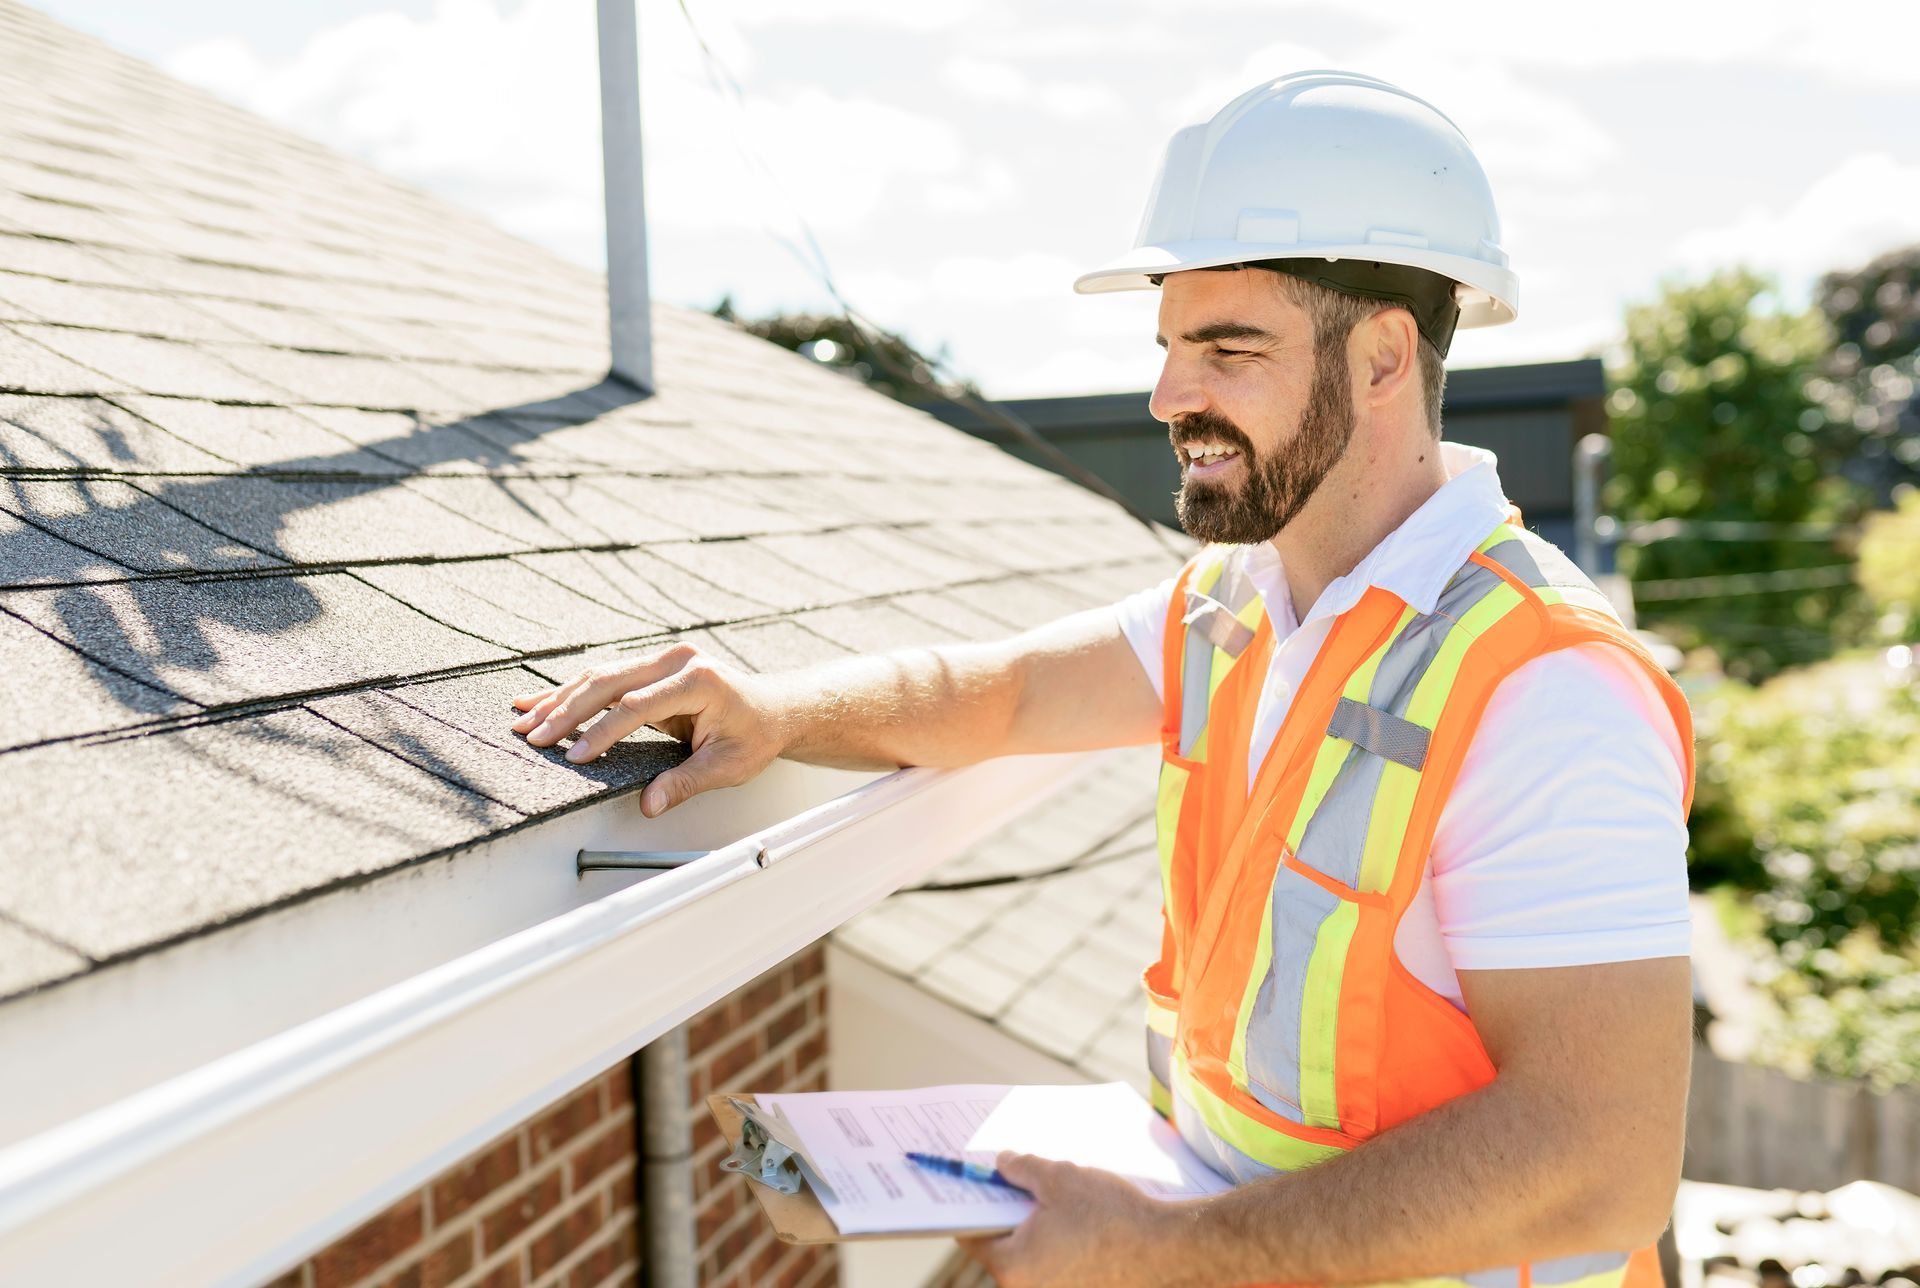 Roofing Contractor in Baton Rouge: 8 Tips to Safeguard Your Home